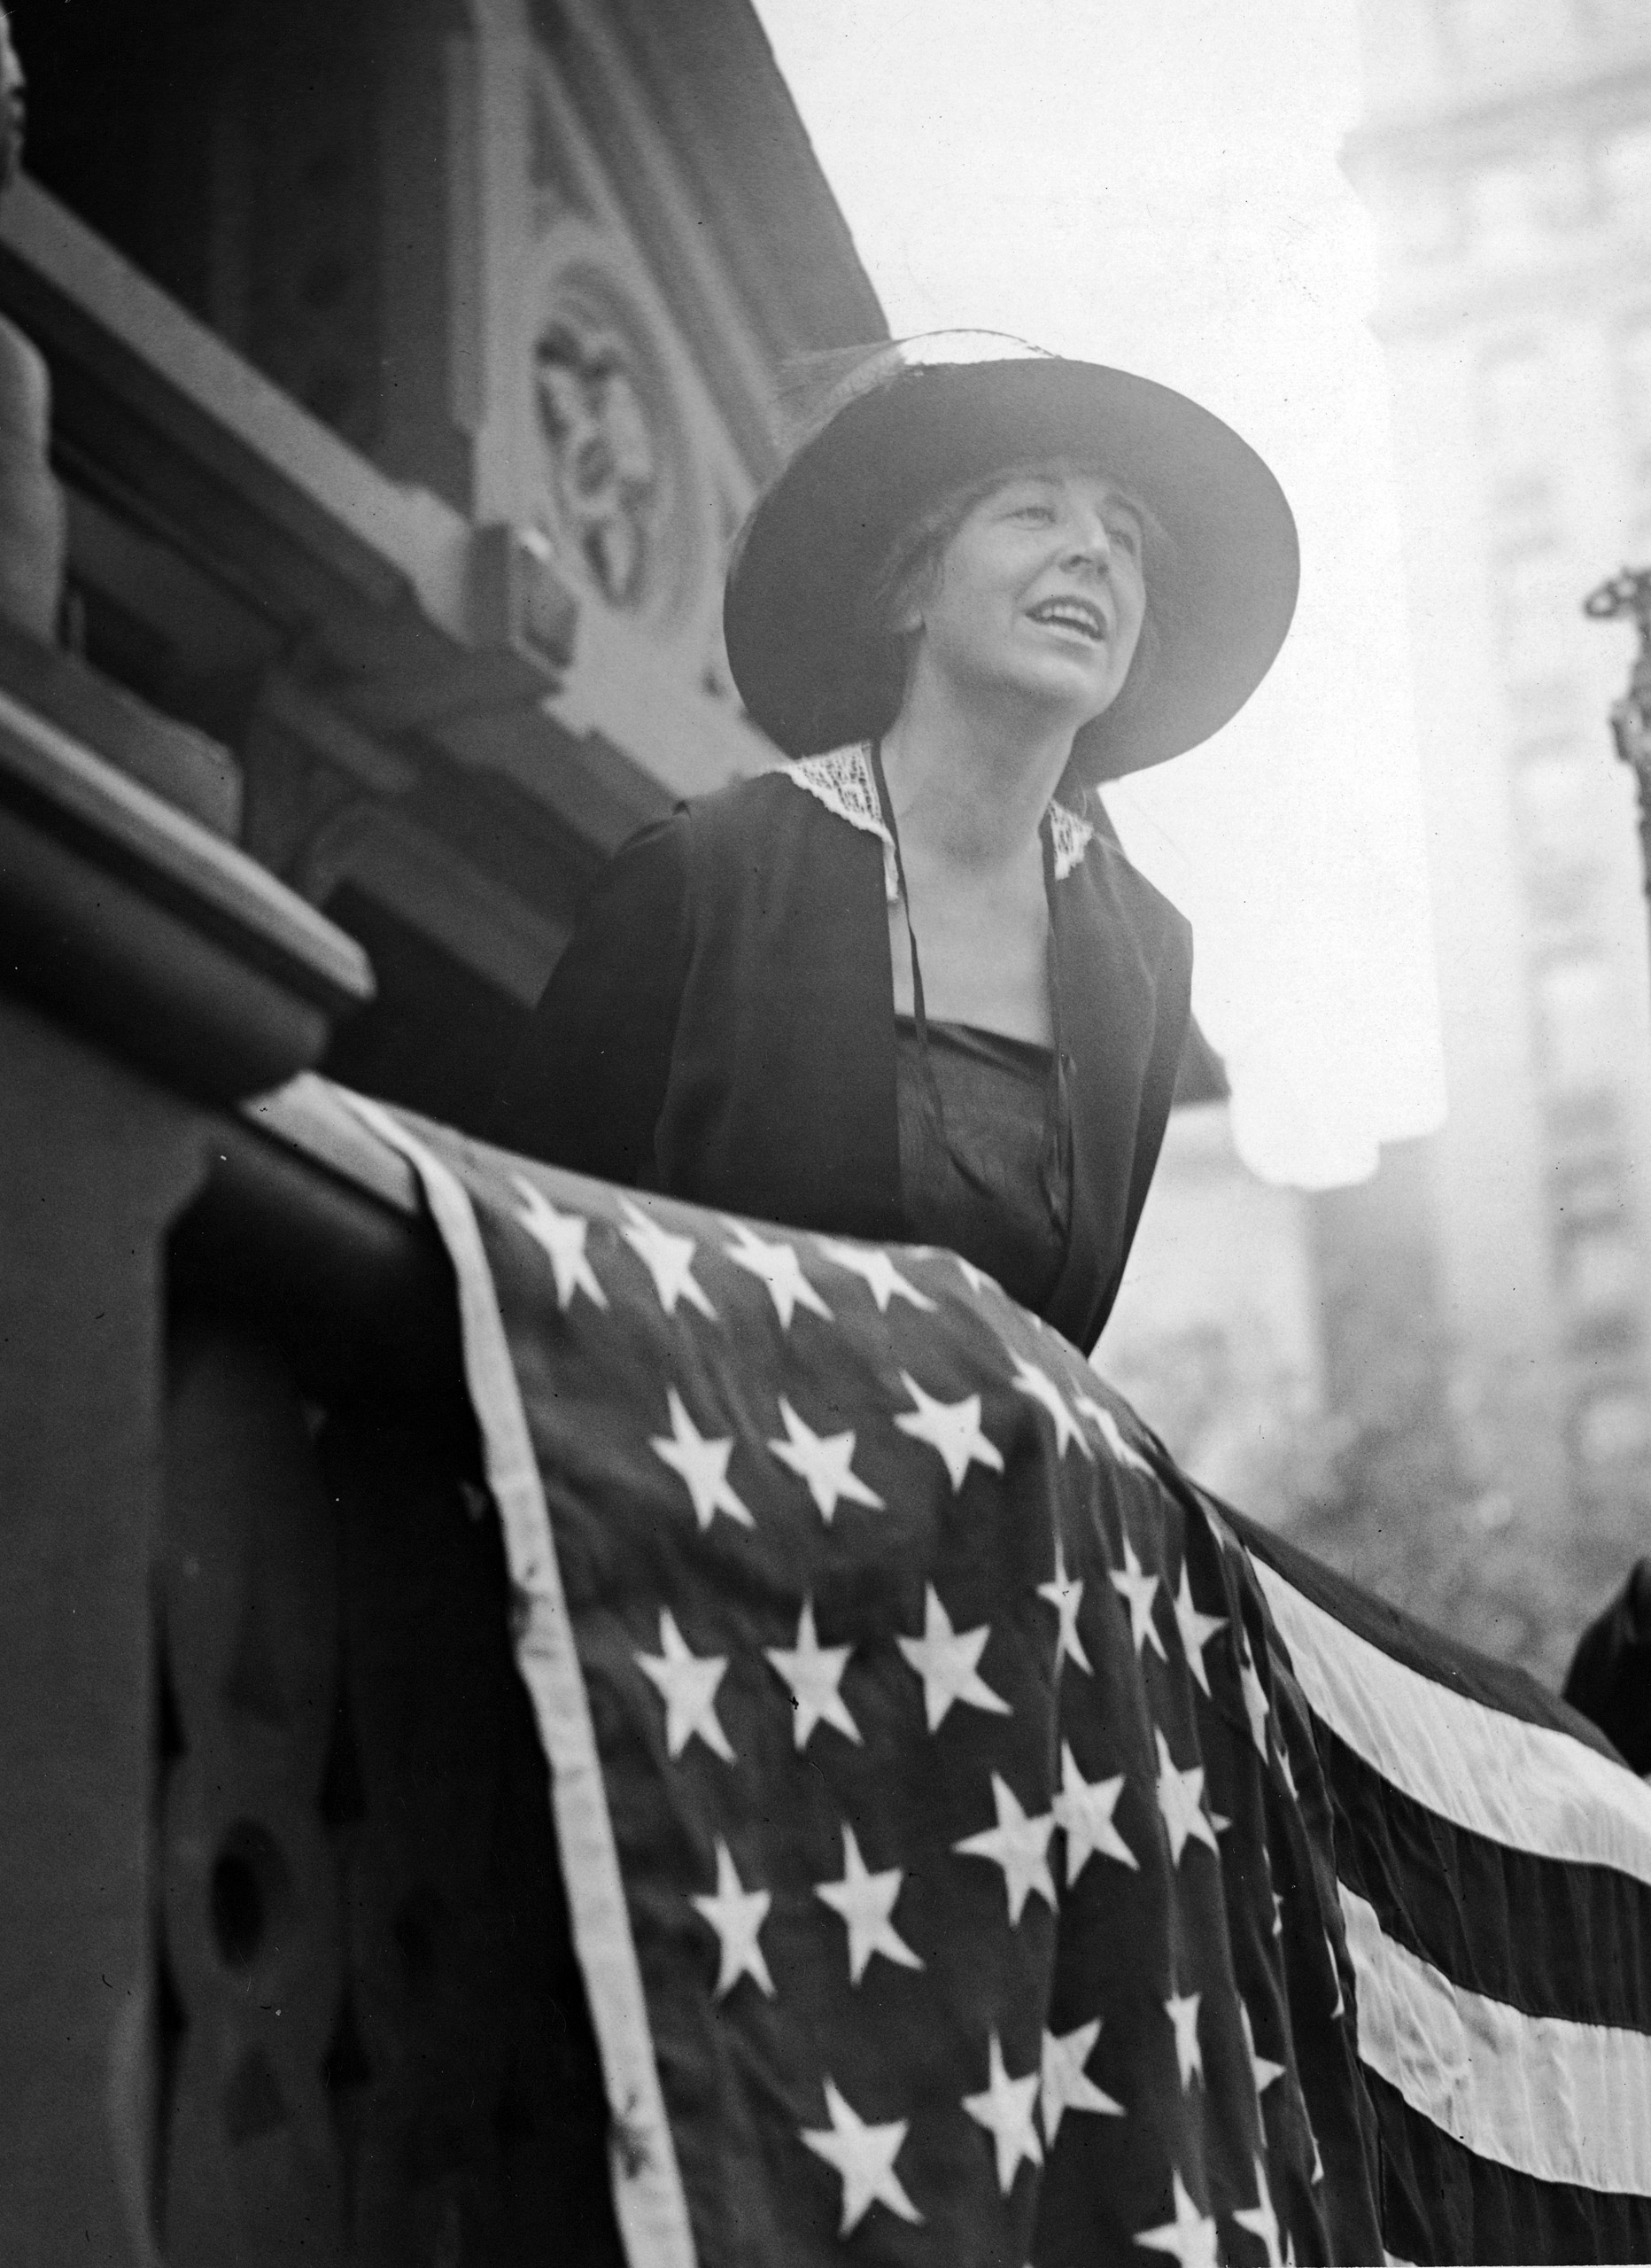 American pacifist leader and former congresswoman Jeannette Rankin (1880 - 1973) addresses a rally at Union Square, New York, New York, September 1924.